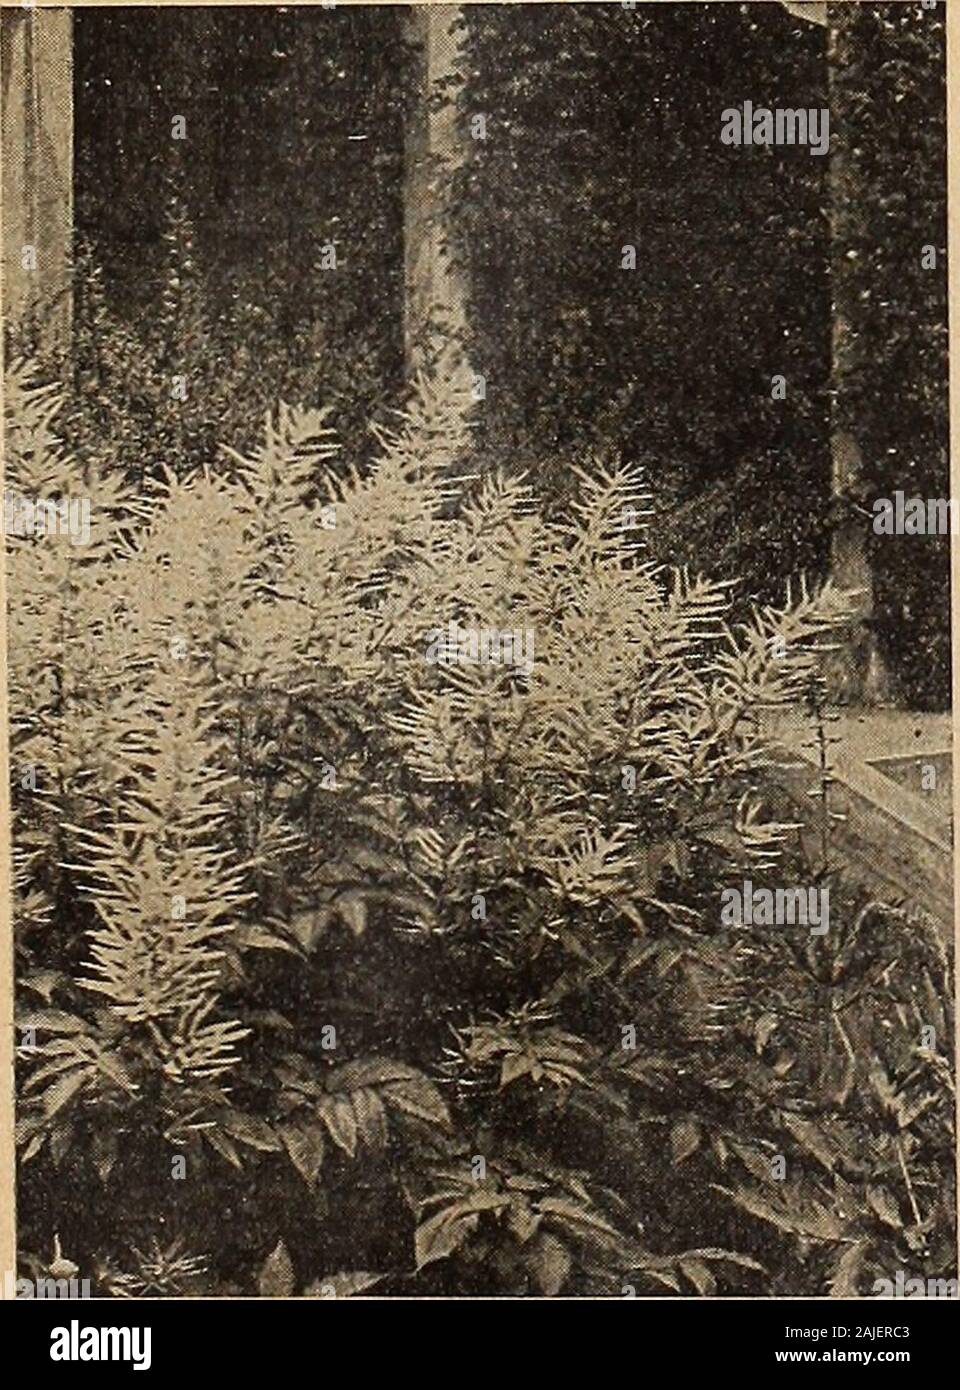 Dreer's autumn catalogue 1918 . Spik«a Aruncus ScABiosA Caucasica SPIR.^A (Goafs Beard. Meadow Sweet)Aruncus. A noble variety, 3 to 5 feet high, producing in June and July long, feathery panicles of white flowers.Filipendula FI. PI. {Double-flowered Drop-wort). Nu-merous corymbs of double white flowers on stems 12 incheshigh, during June and July, and pretty fern-like foliage.Palmata ( Crimson Meadow Sweet). One of the most beau-tiful hardy plants, with broad corymbs of crimson-purple flowers in June andJuly; 3 feet.Palmata Elegans. A free-flowering, silvery pink variety; 3 feet high; June and Stock Photo